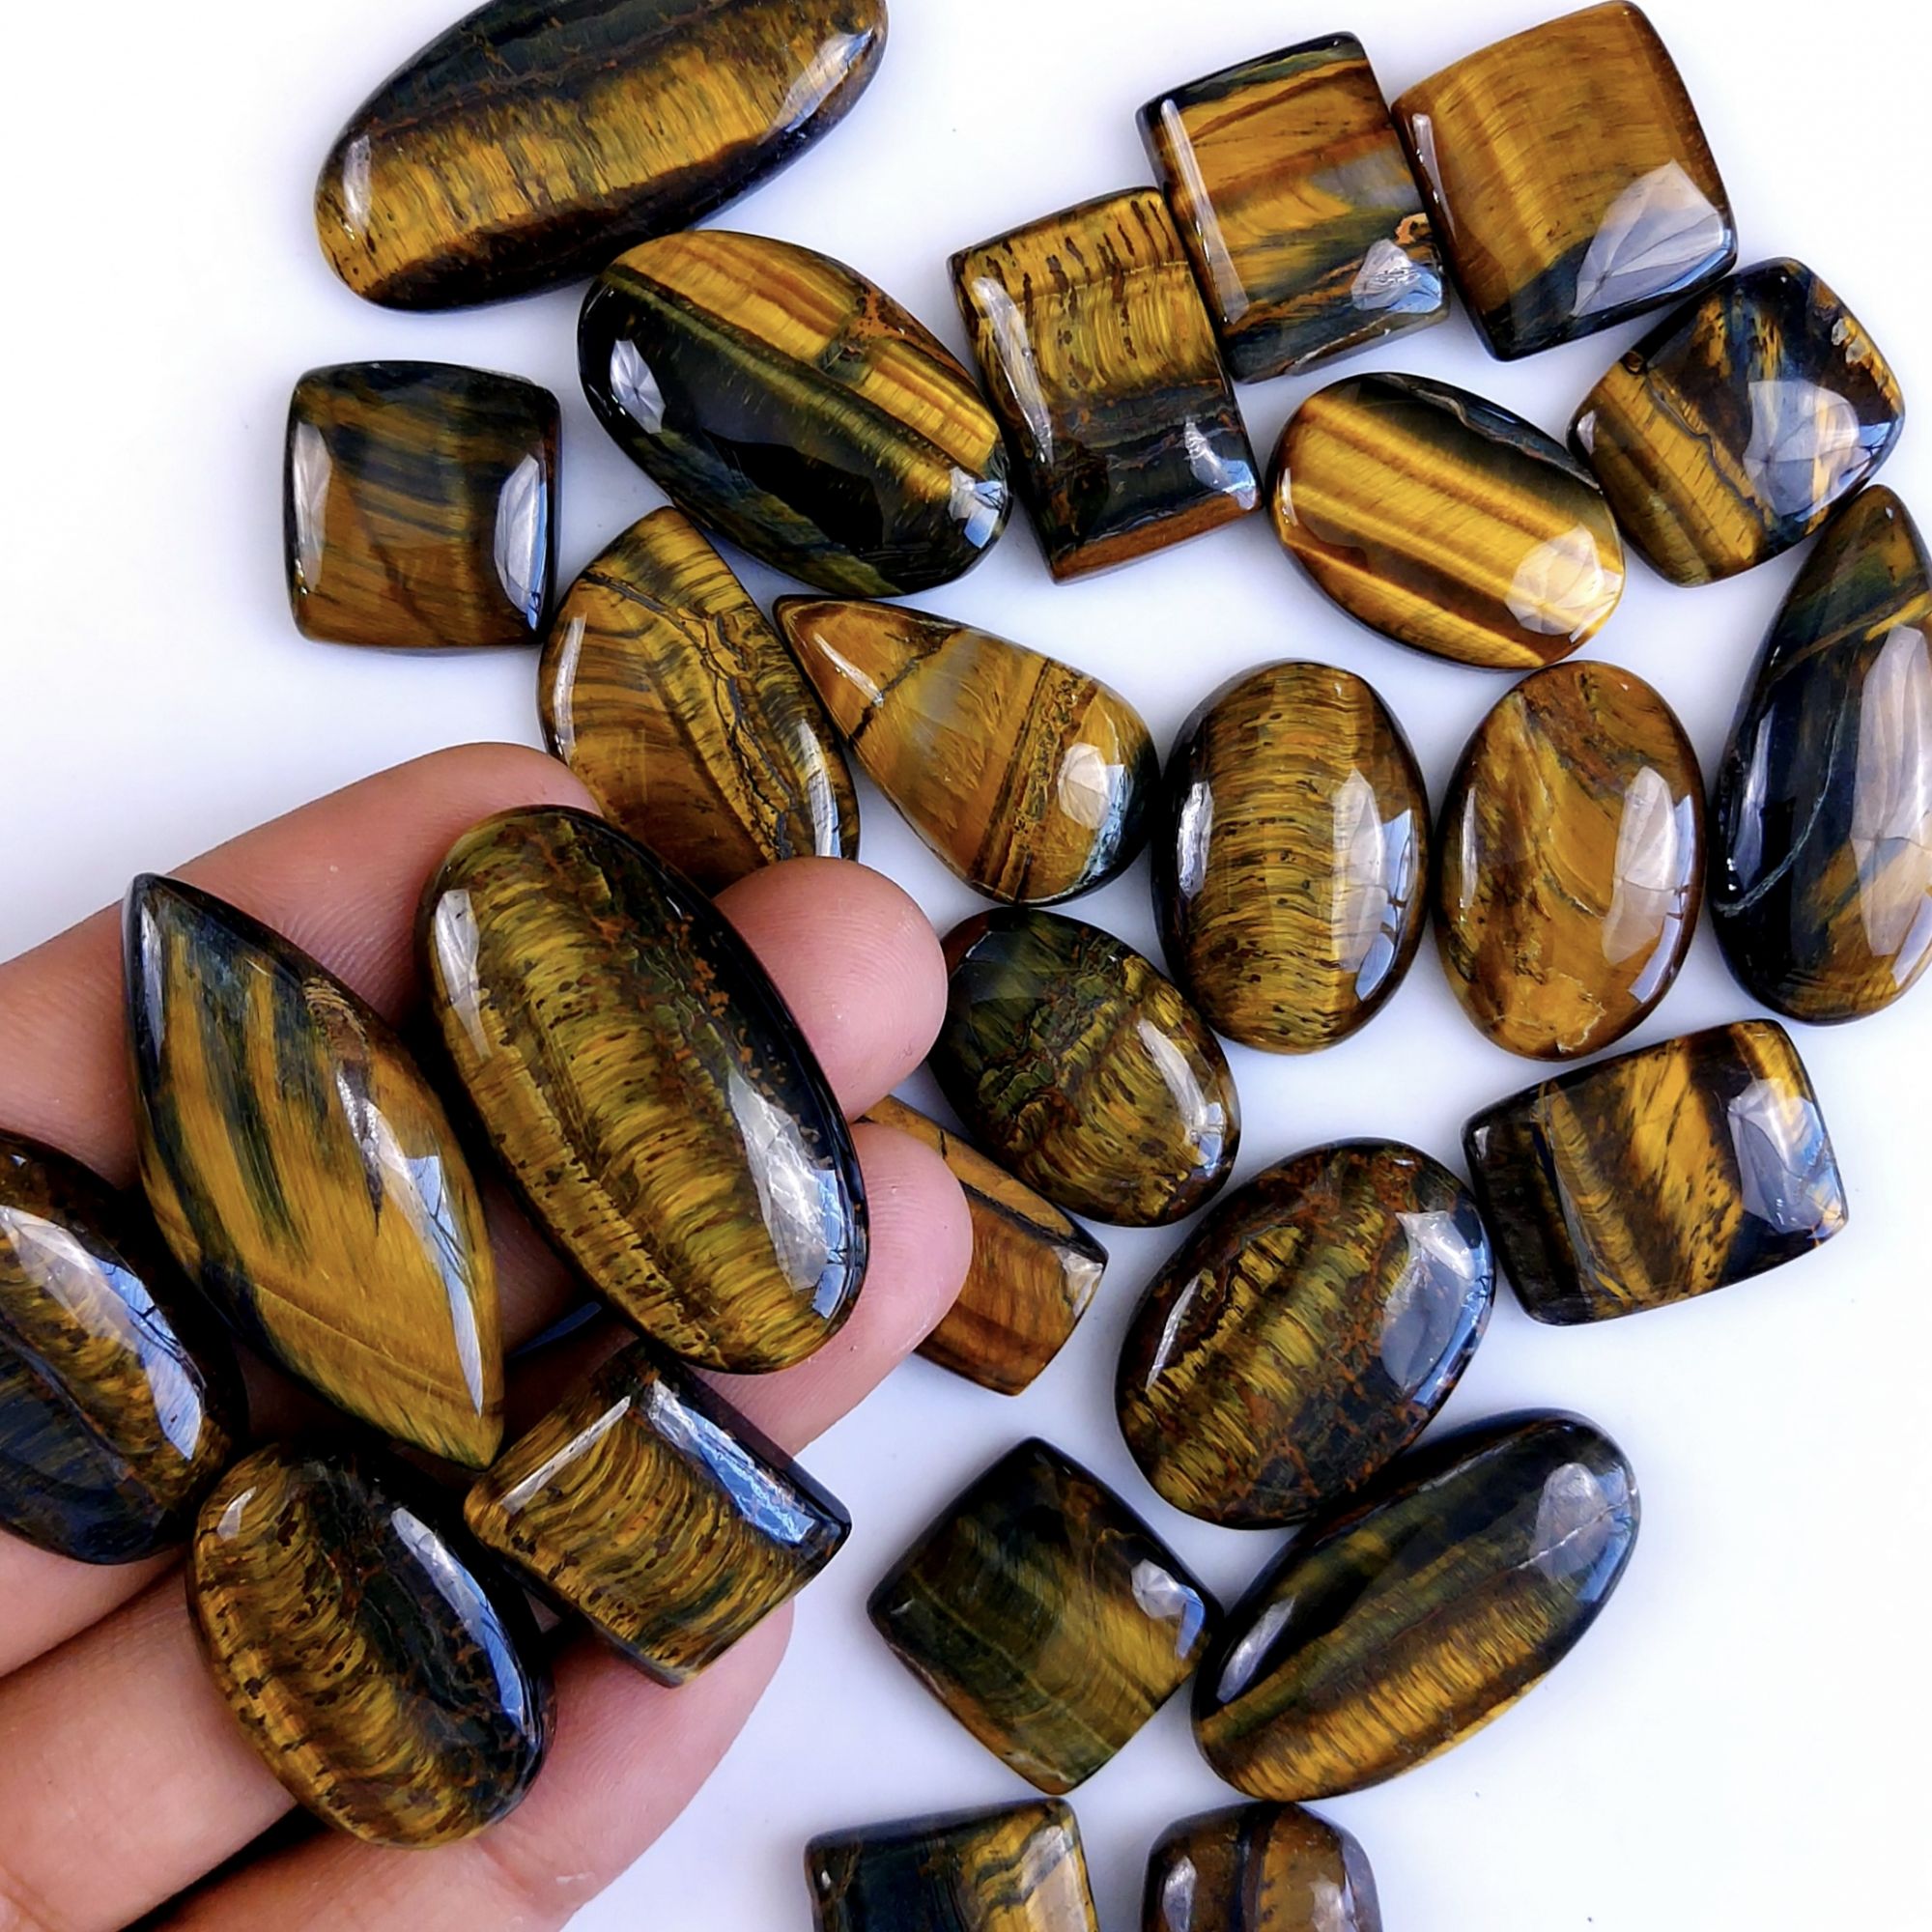 26Pcs 690Cts Natural Tiger Eye Loose Cabochon Gemstone Lot Mix Shape and and Size for Jewelry Making 38x20 20x15mm#1316